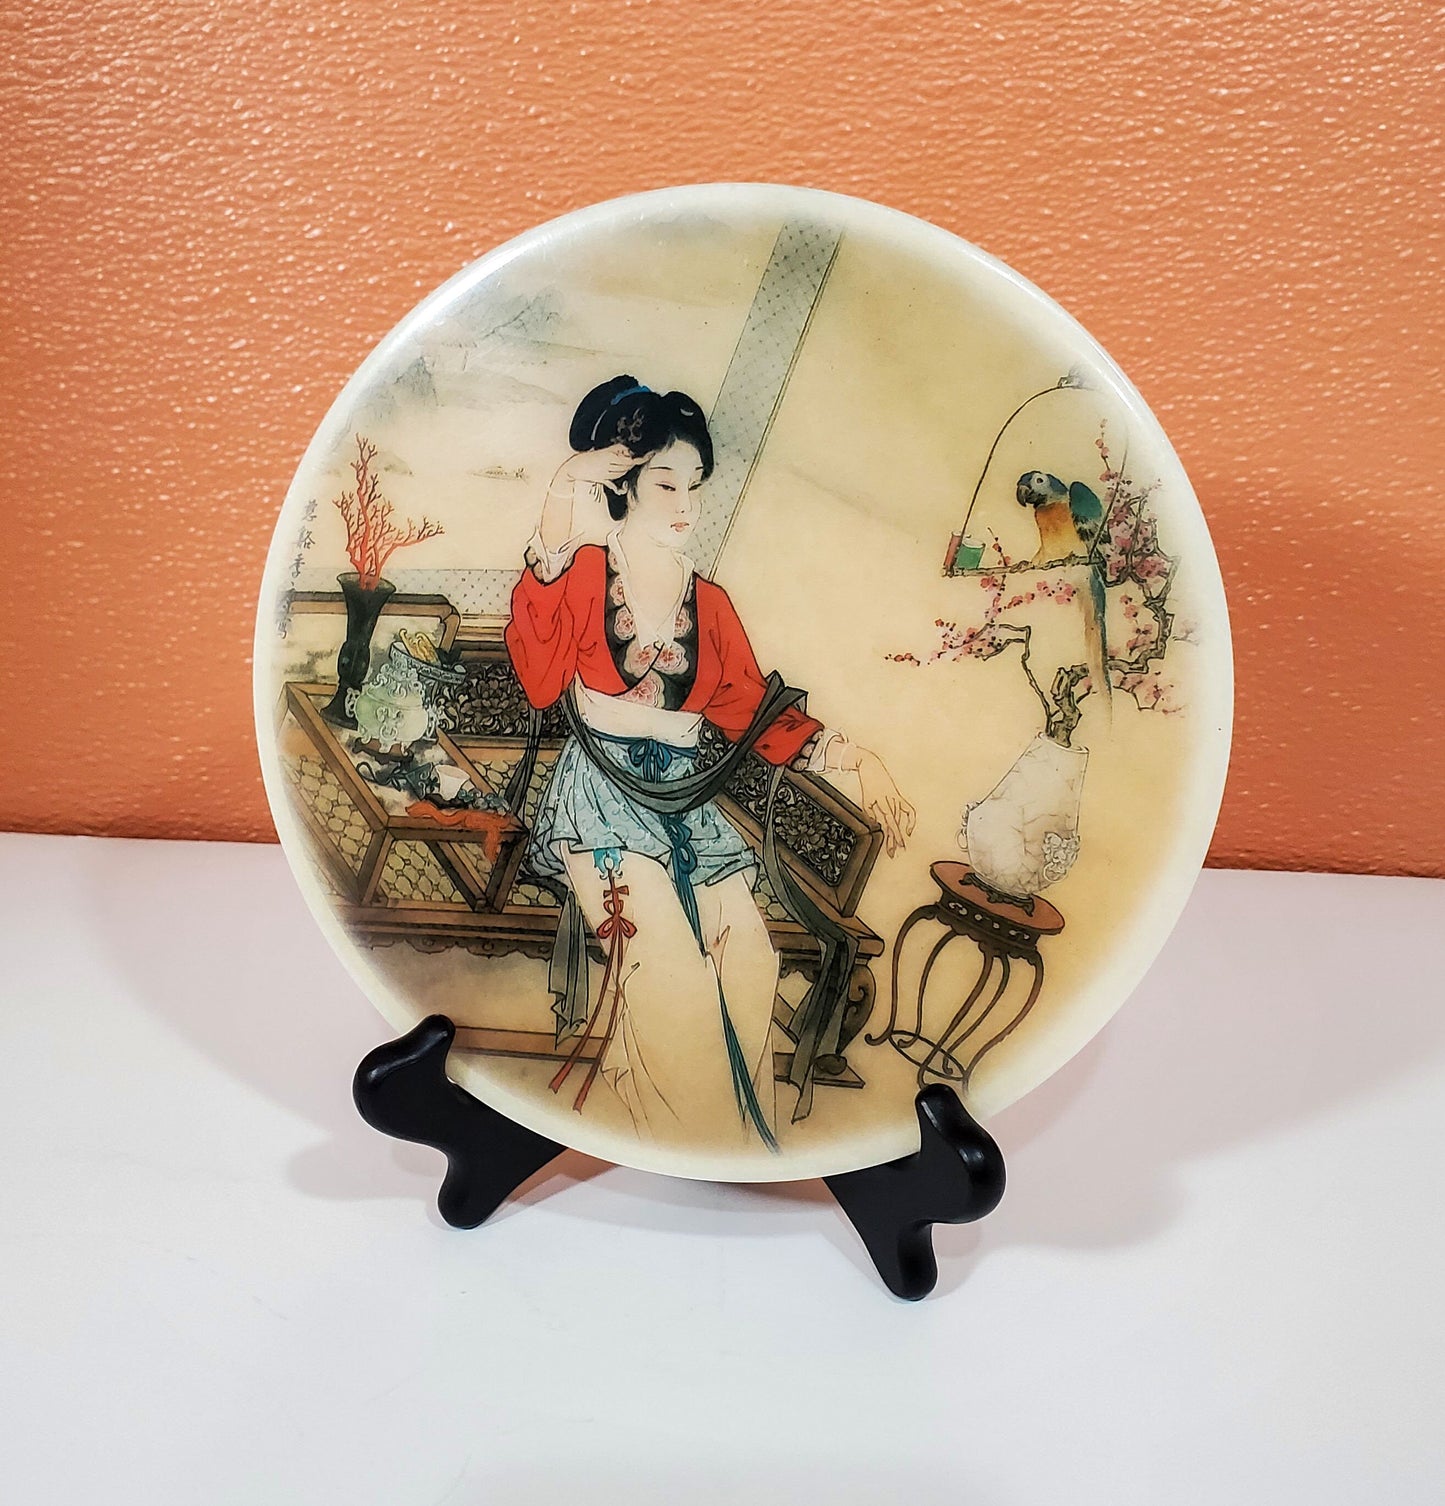 Vintage Hand-Painted Geisha Stone Plate with Wooden Stand | Home Decor Plate 8”